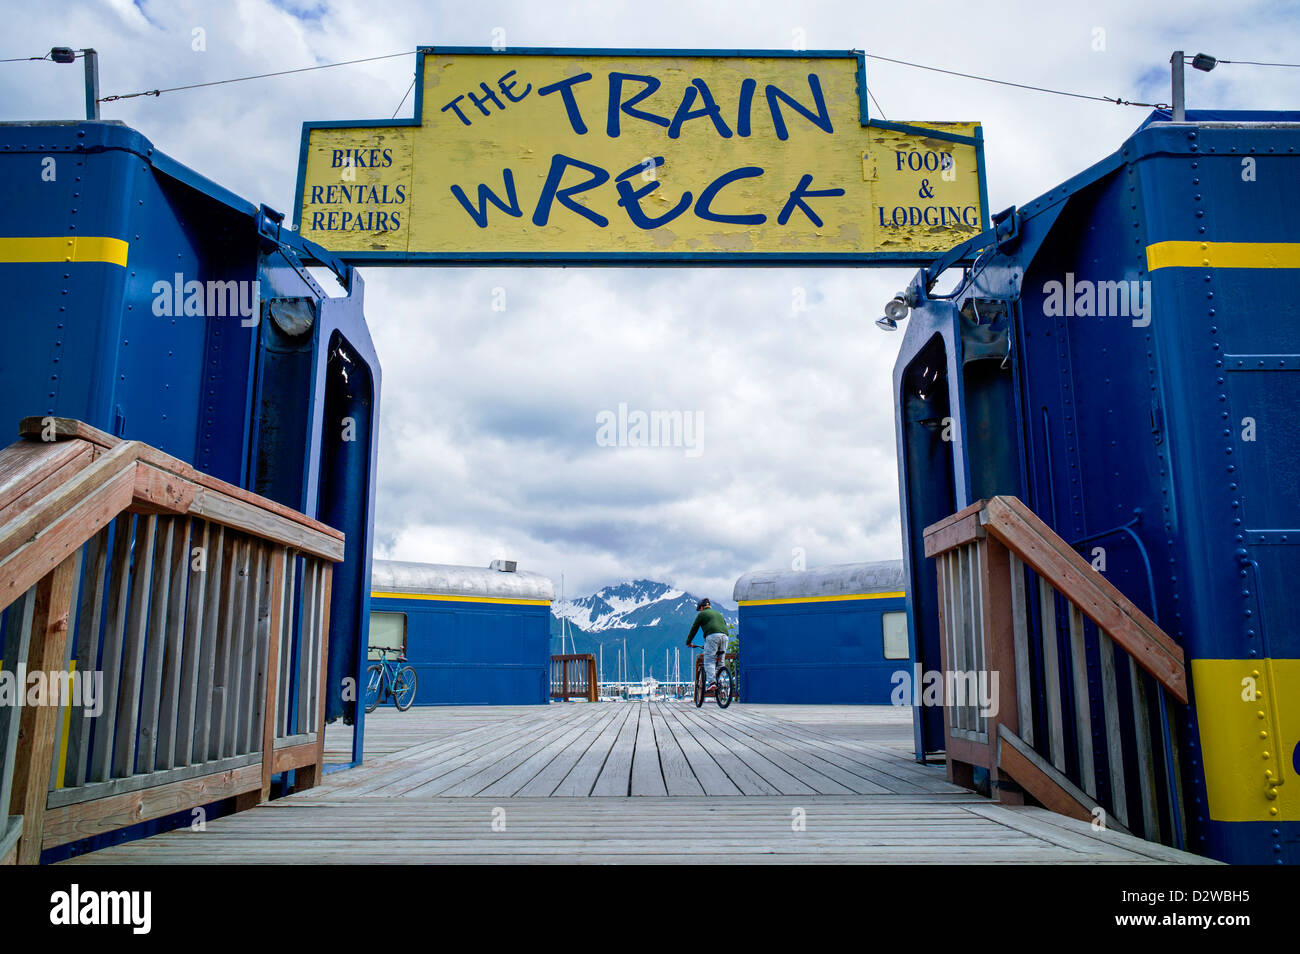 The Train Wreck, collection of refurbished railcars from Alaska Railroad now house The Smoke Shop cafe, and Seward Bike Shop, AK Stock Photo